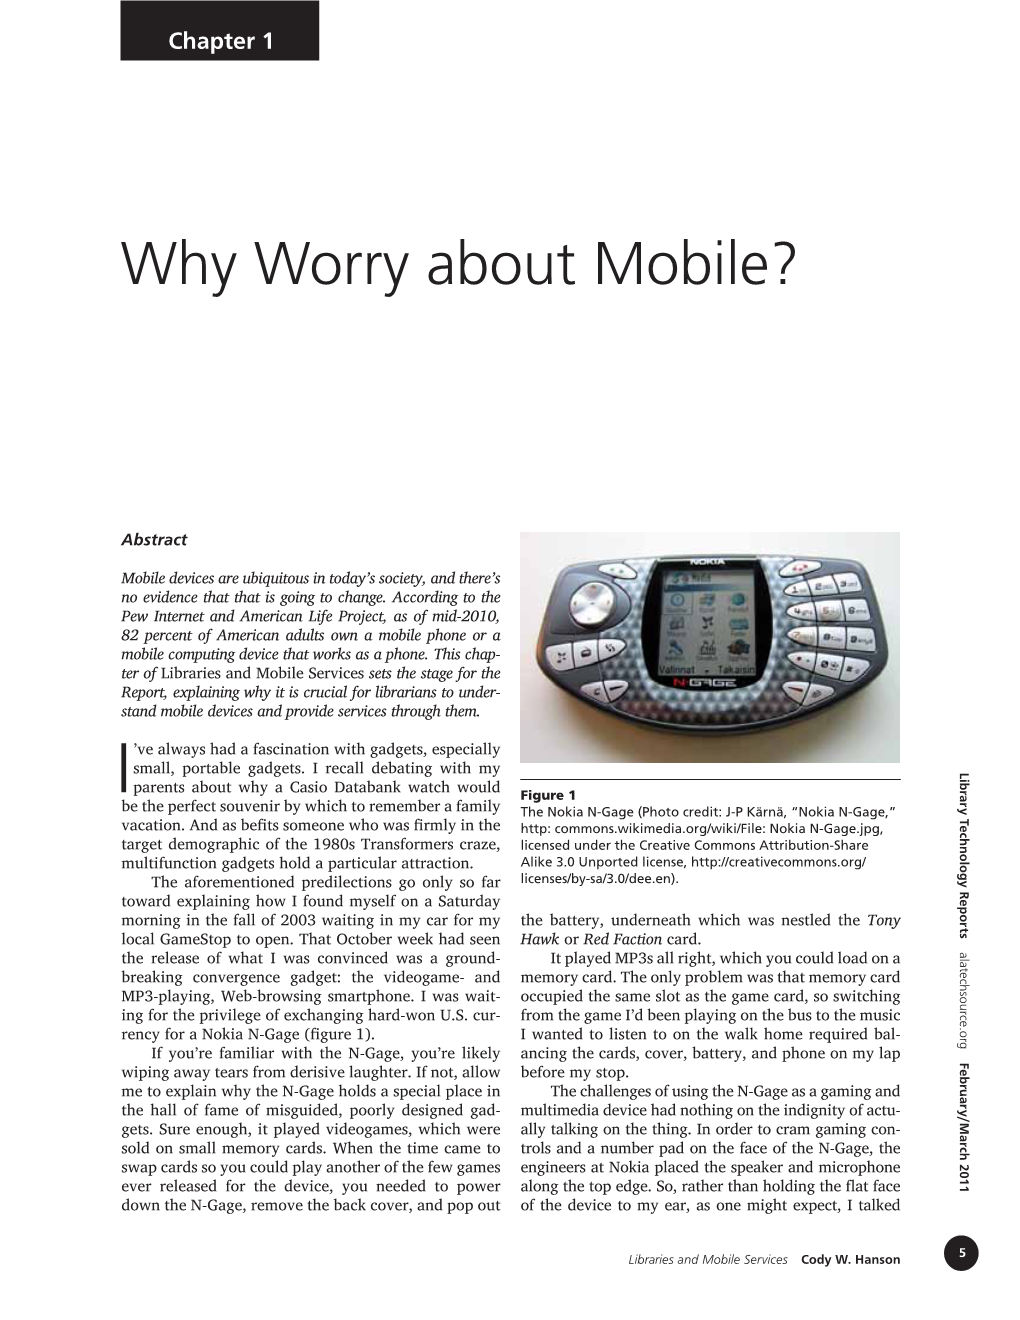 Why Worry About Mobile?